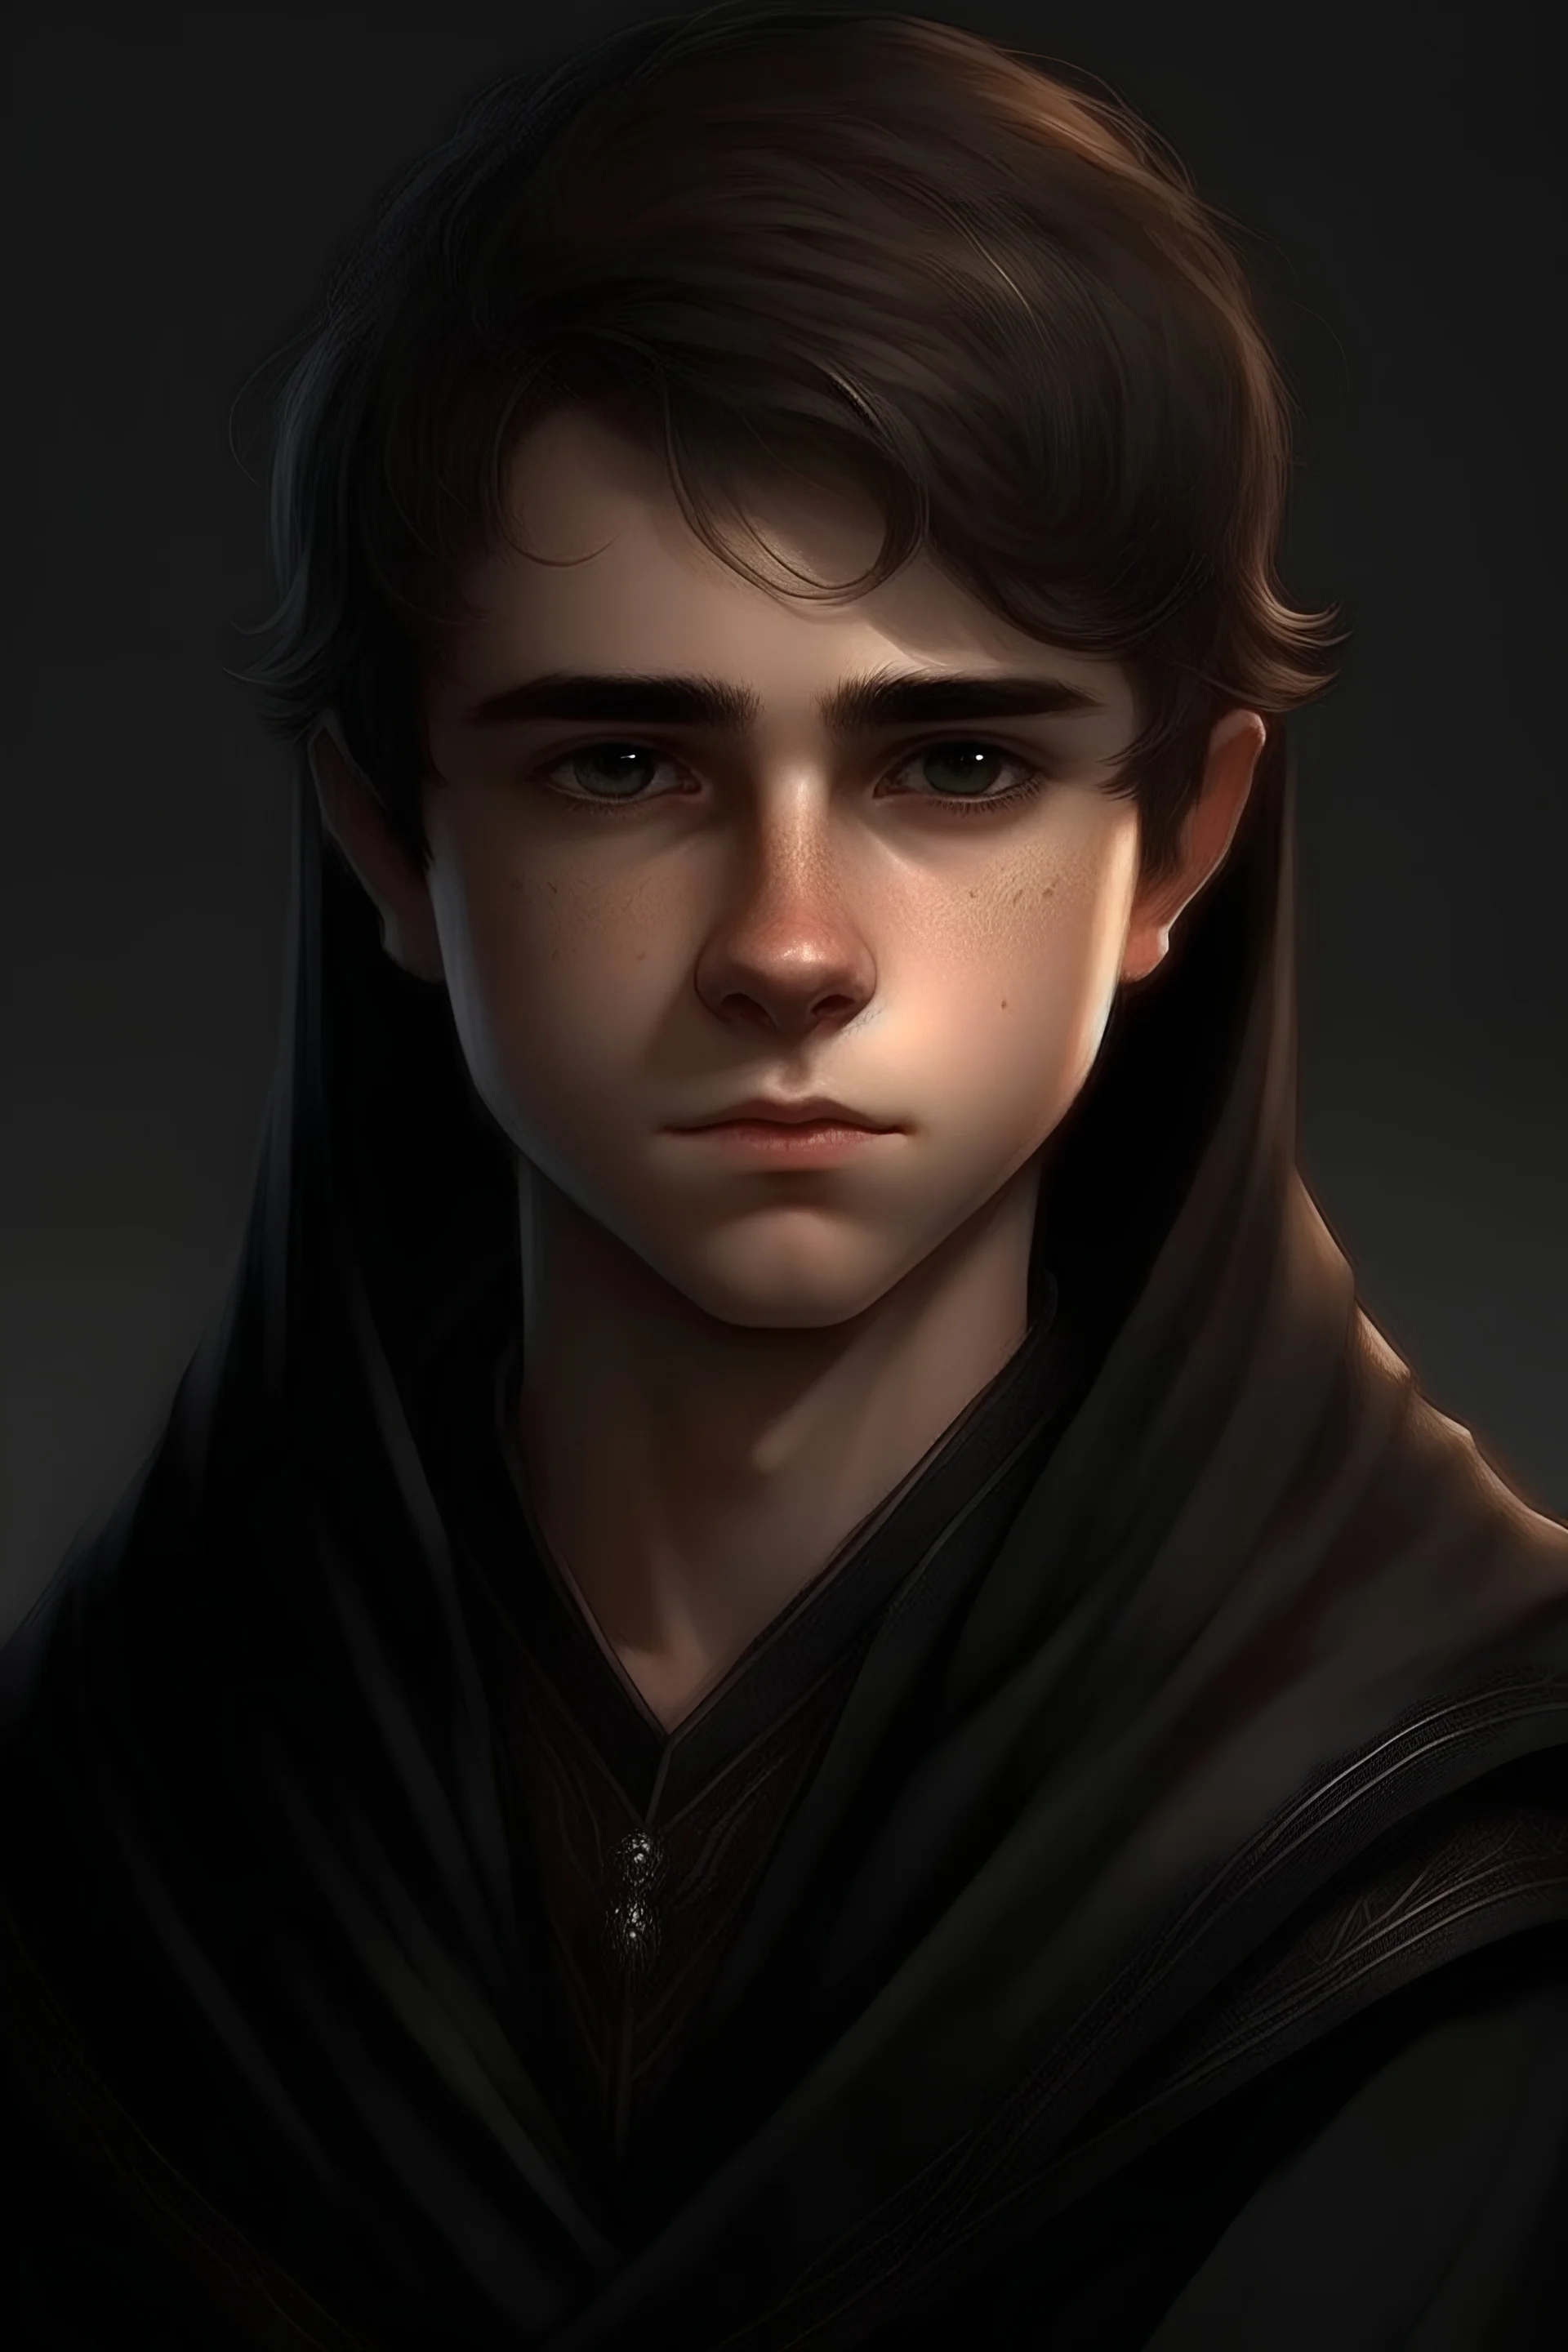 a 15 year old male, short brown hair, round innocent face, brown eyes, melancholic, dressed in black robes, realistic epic fantasy style